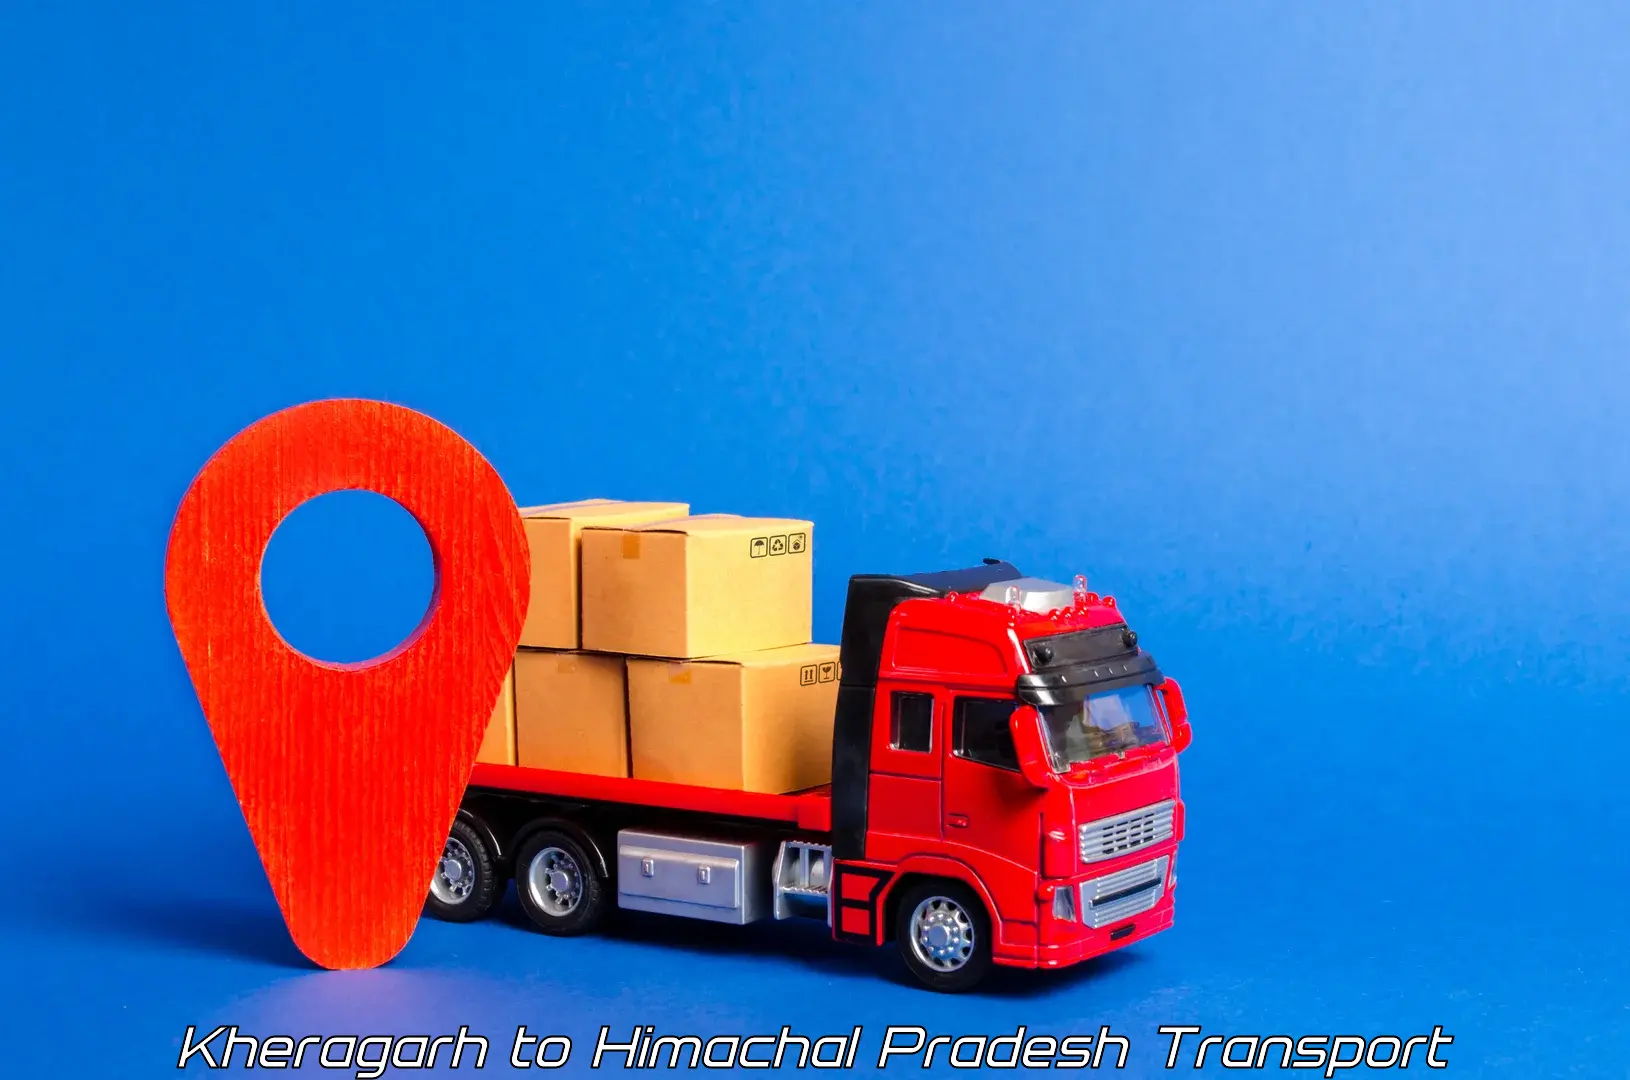 Domestic goods transportation services Kheragarh to Chachyot